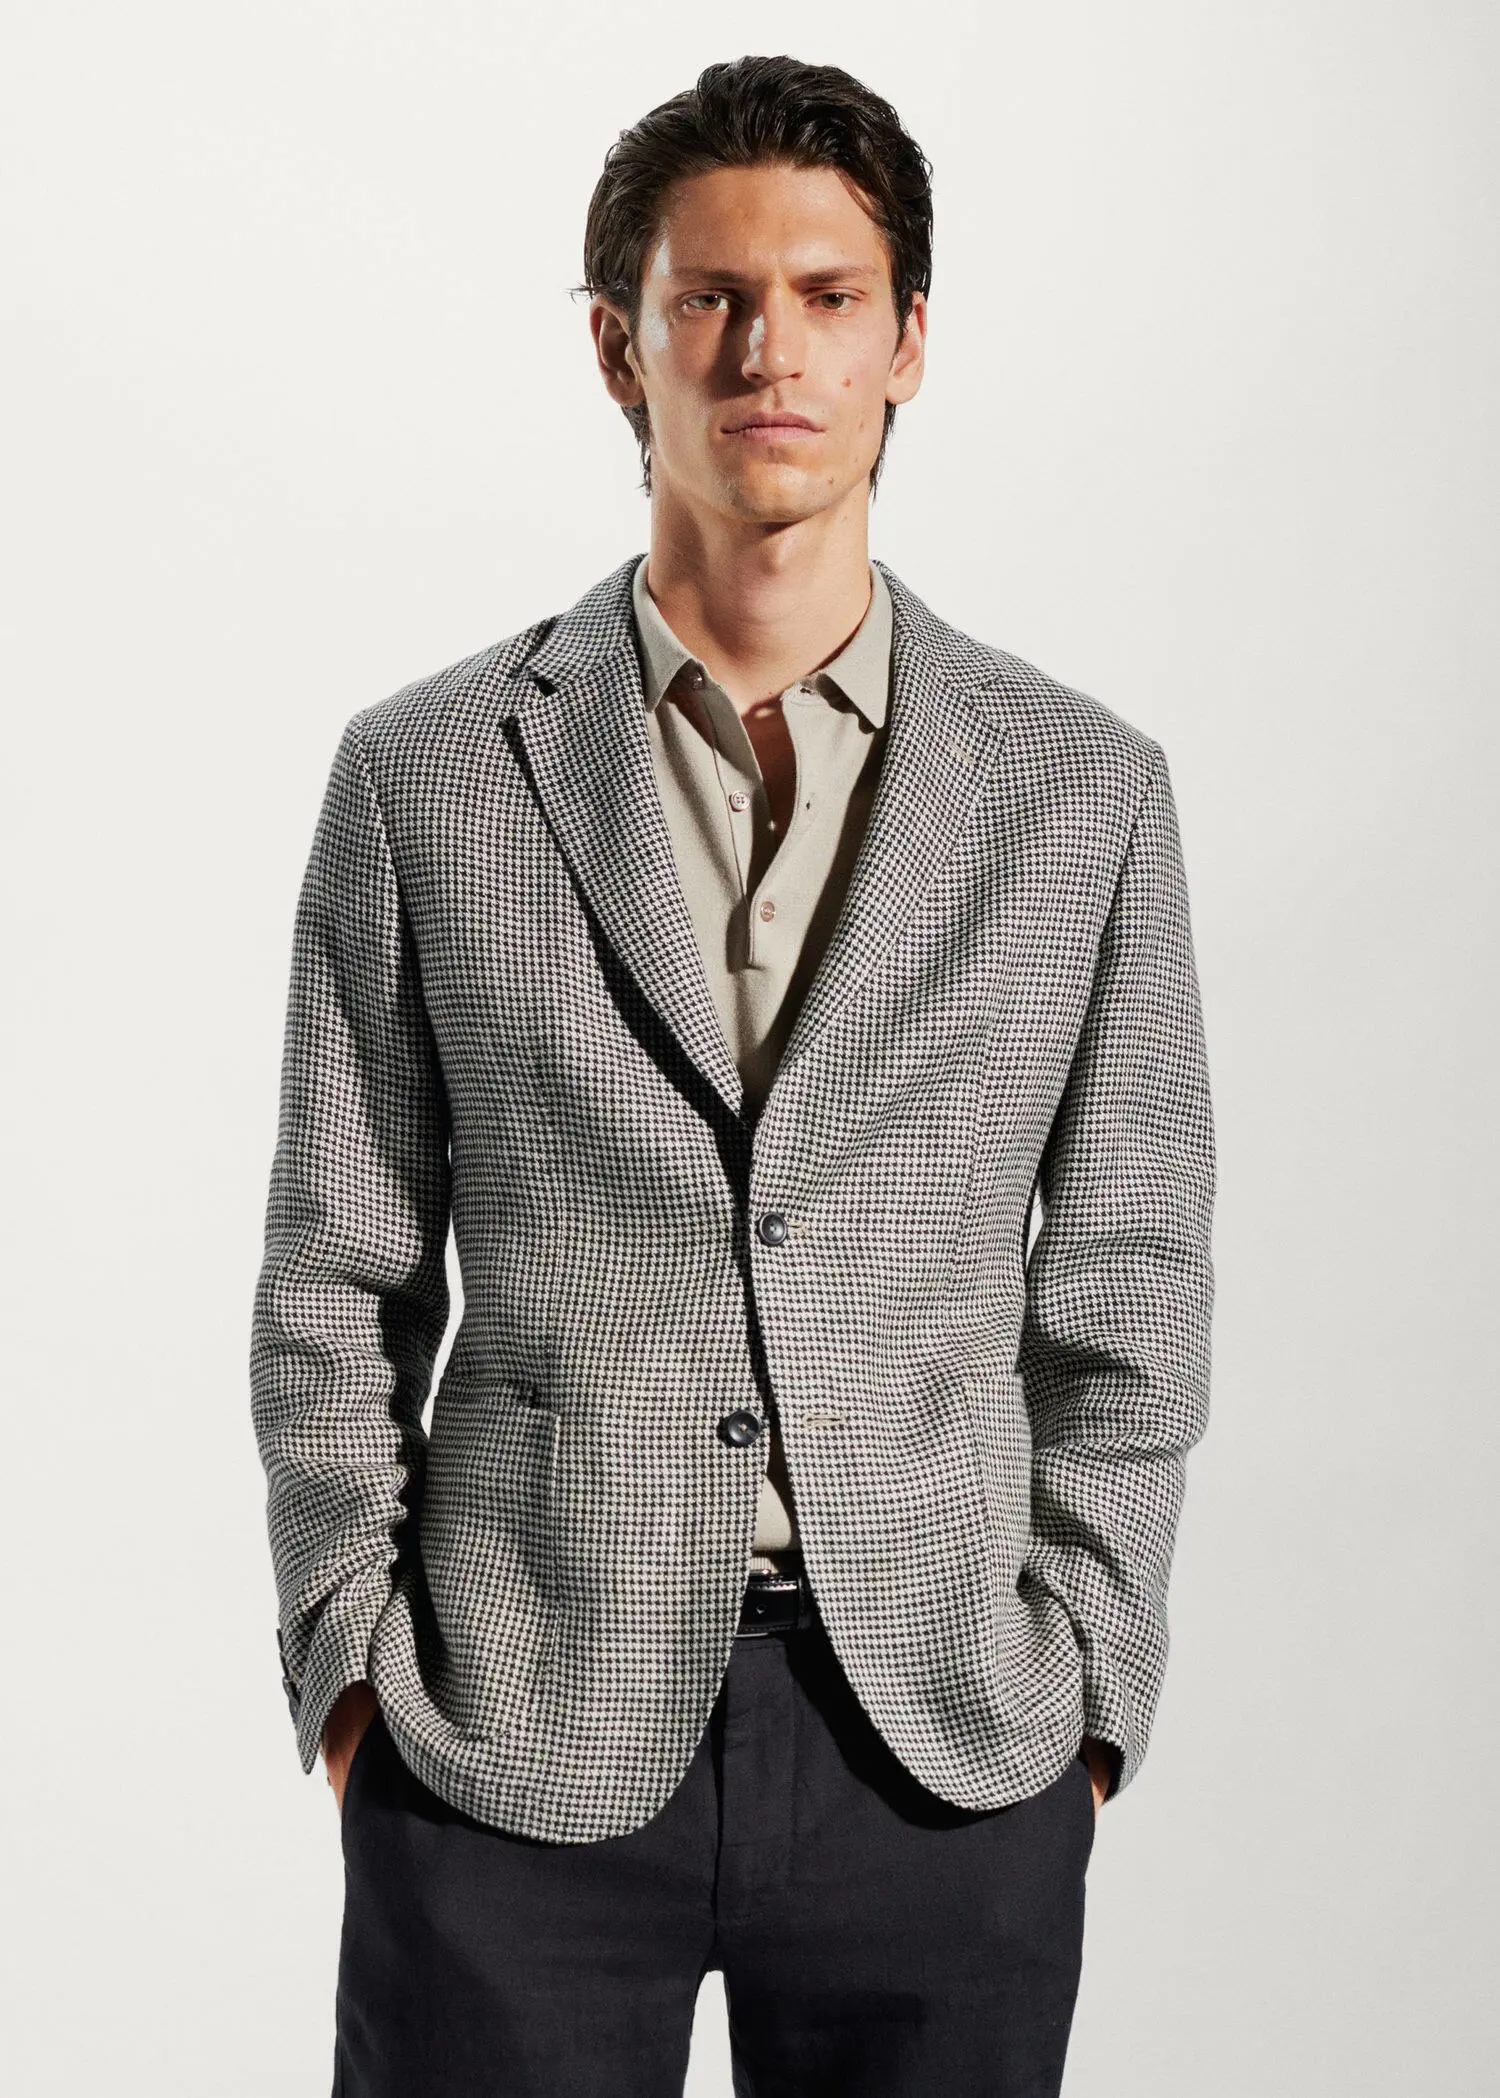 Mango 100% linen micro-houndstooth blazer. a man wearing a jacket and a tie. 